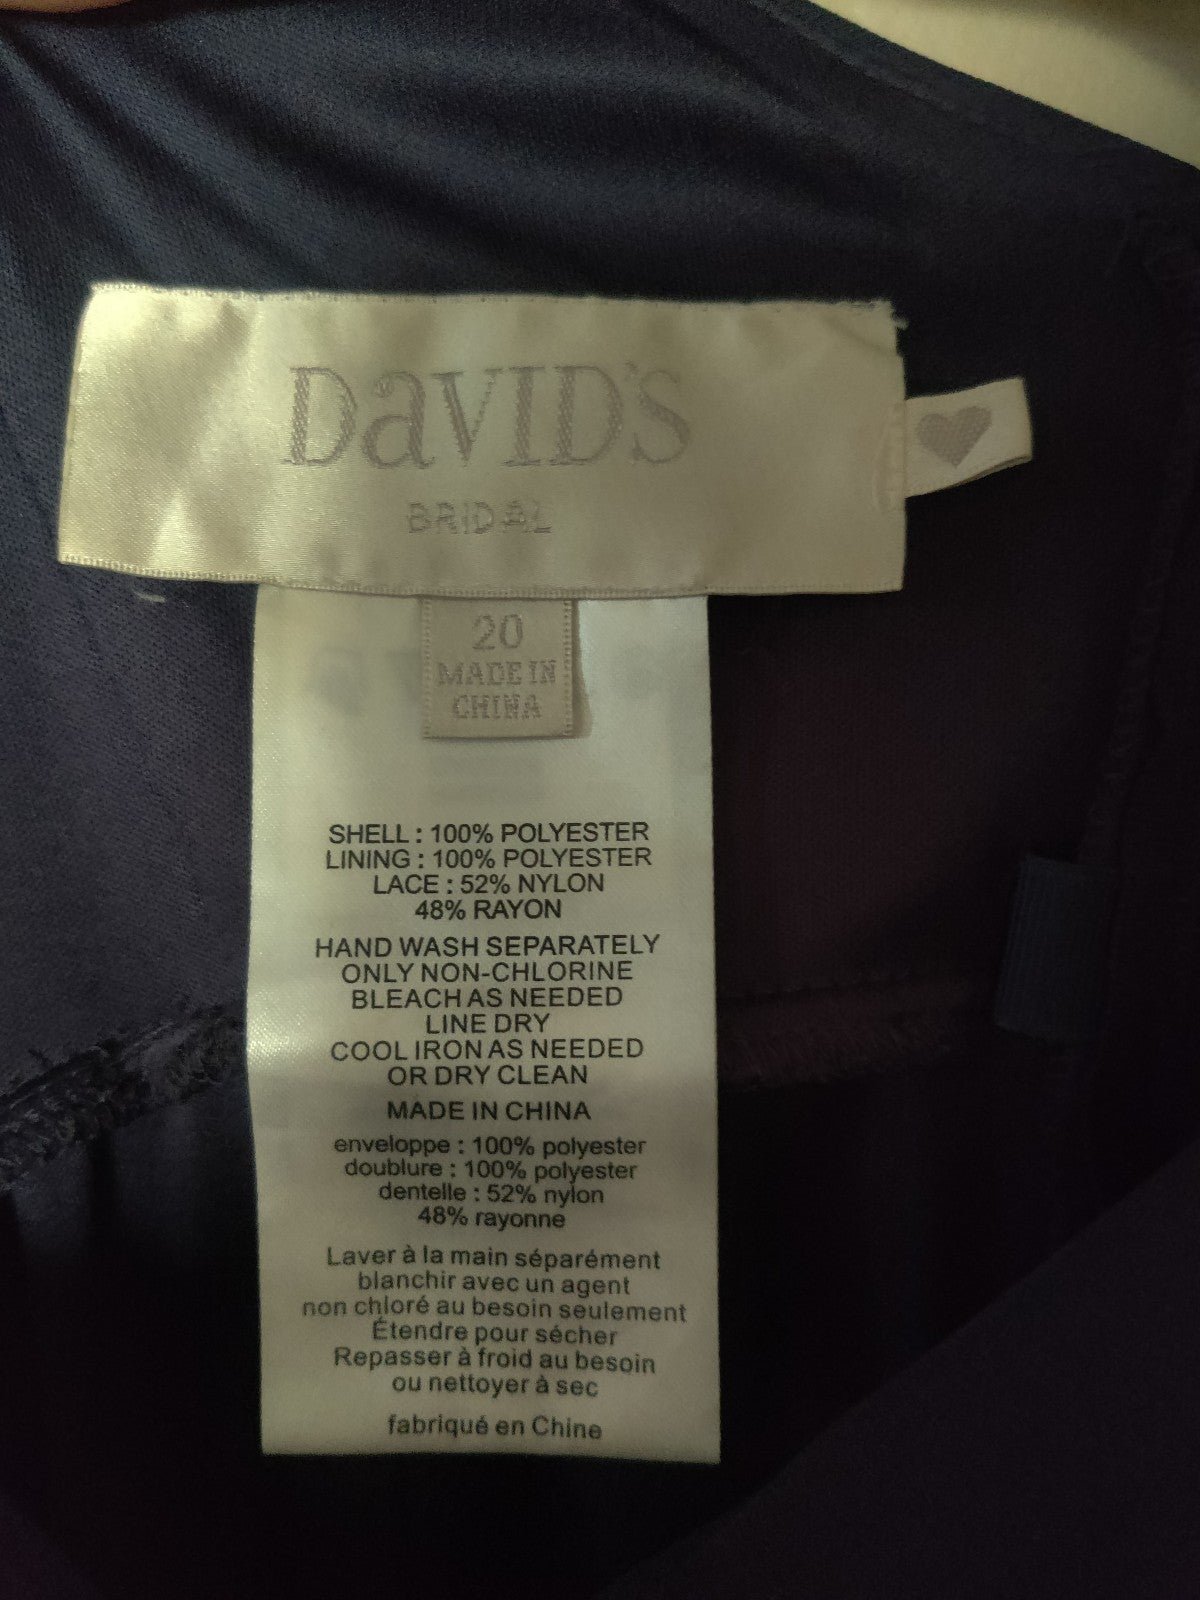 Cheap *** David´s Bridal dress size 20  Excellent Condition *** OWTO3c2mU Great